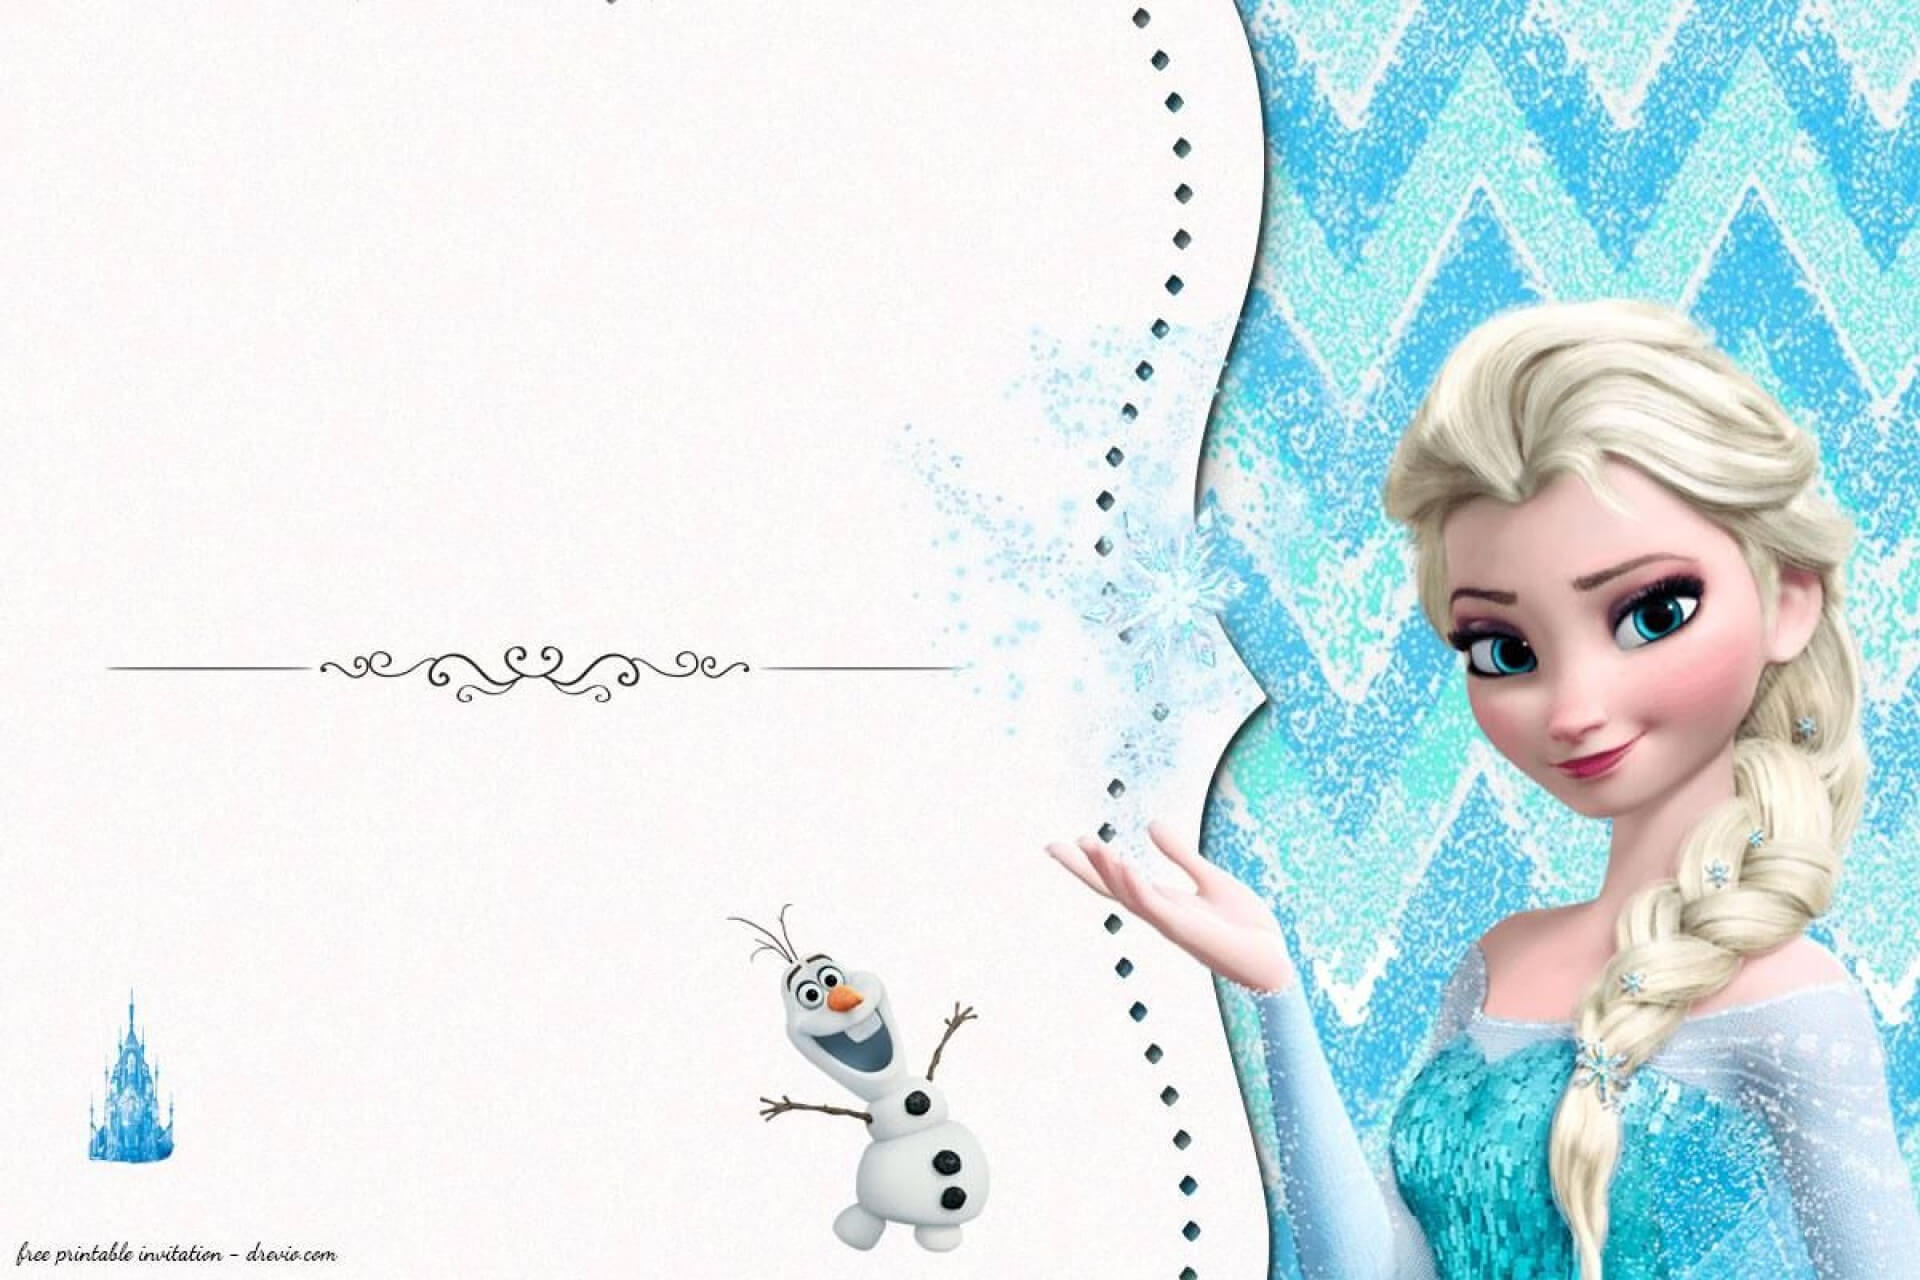 029-frozen-birthday-card-template-thank-you-printable-note-inside